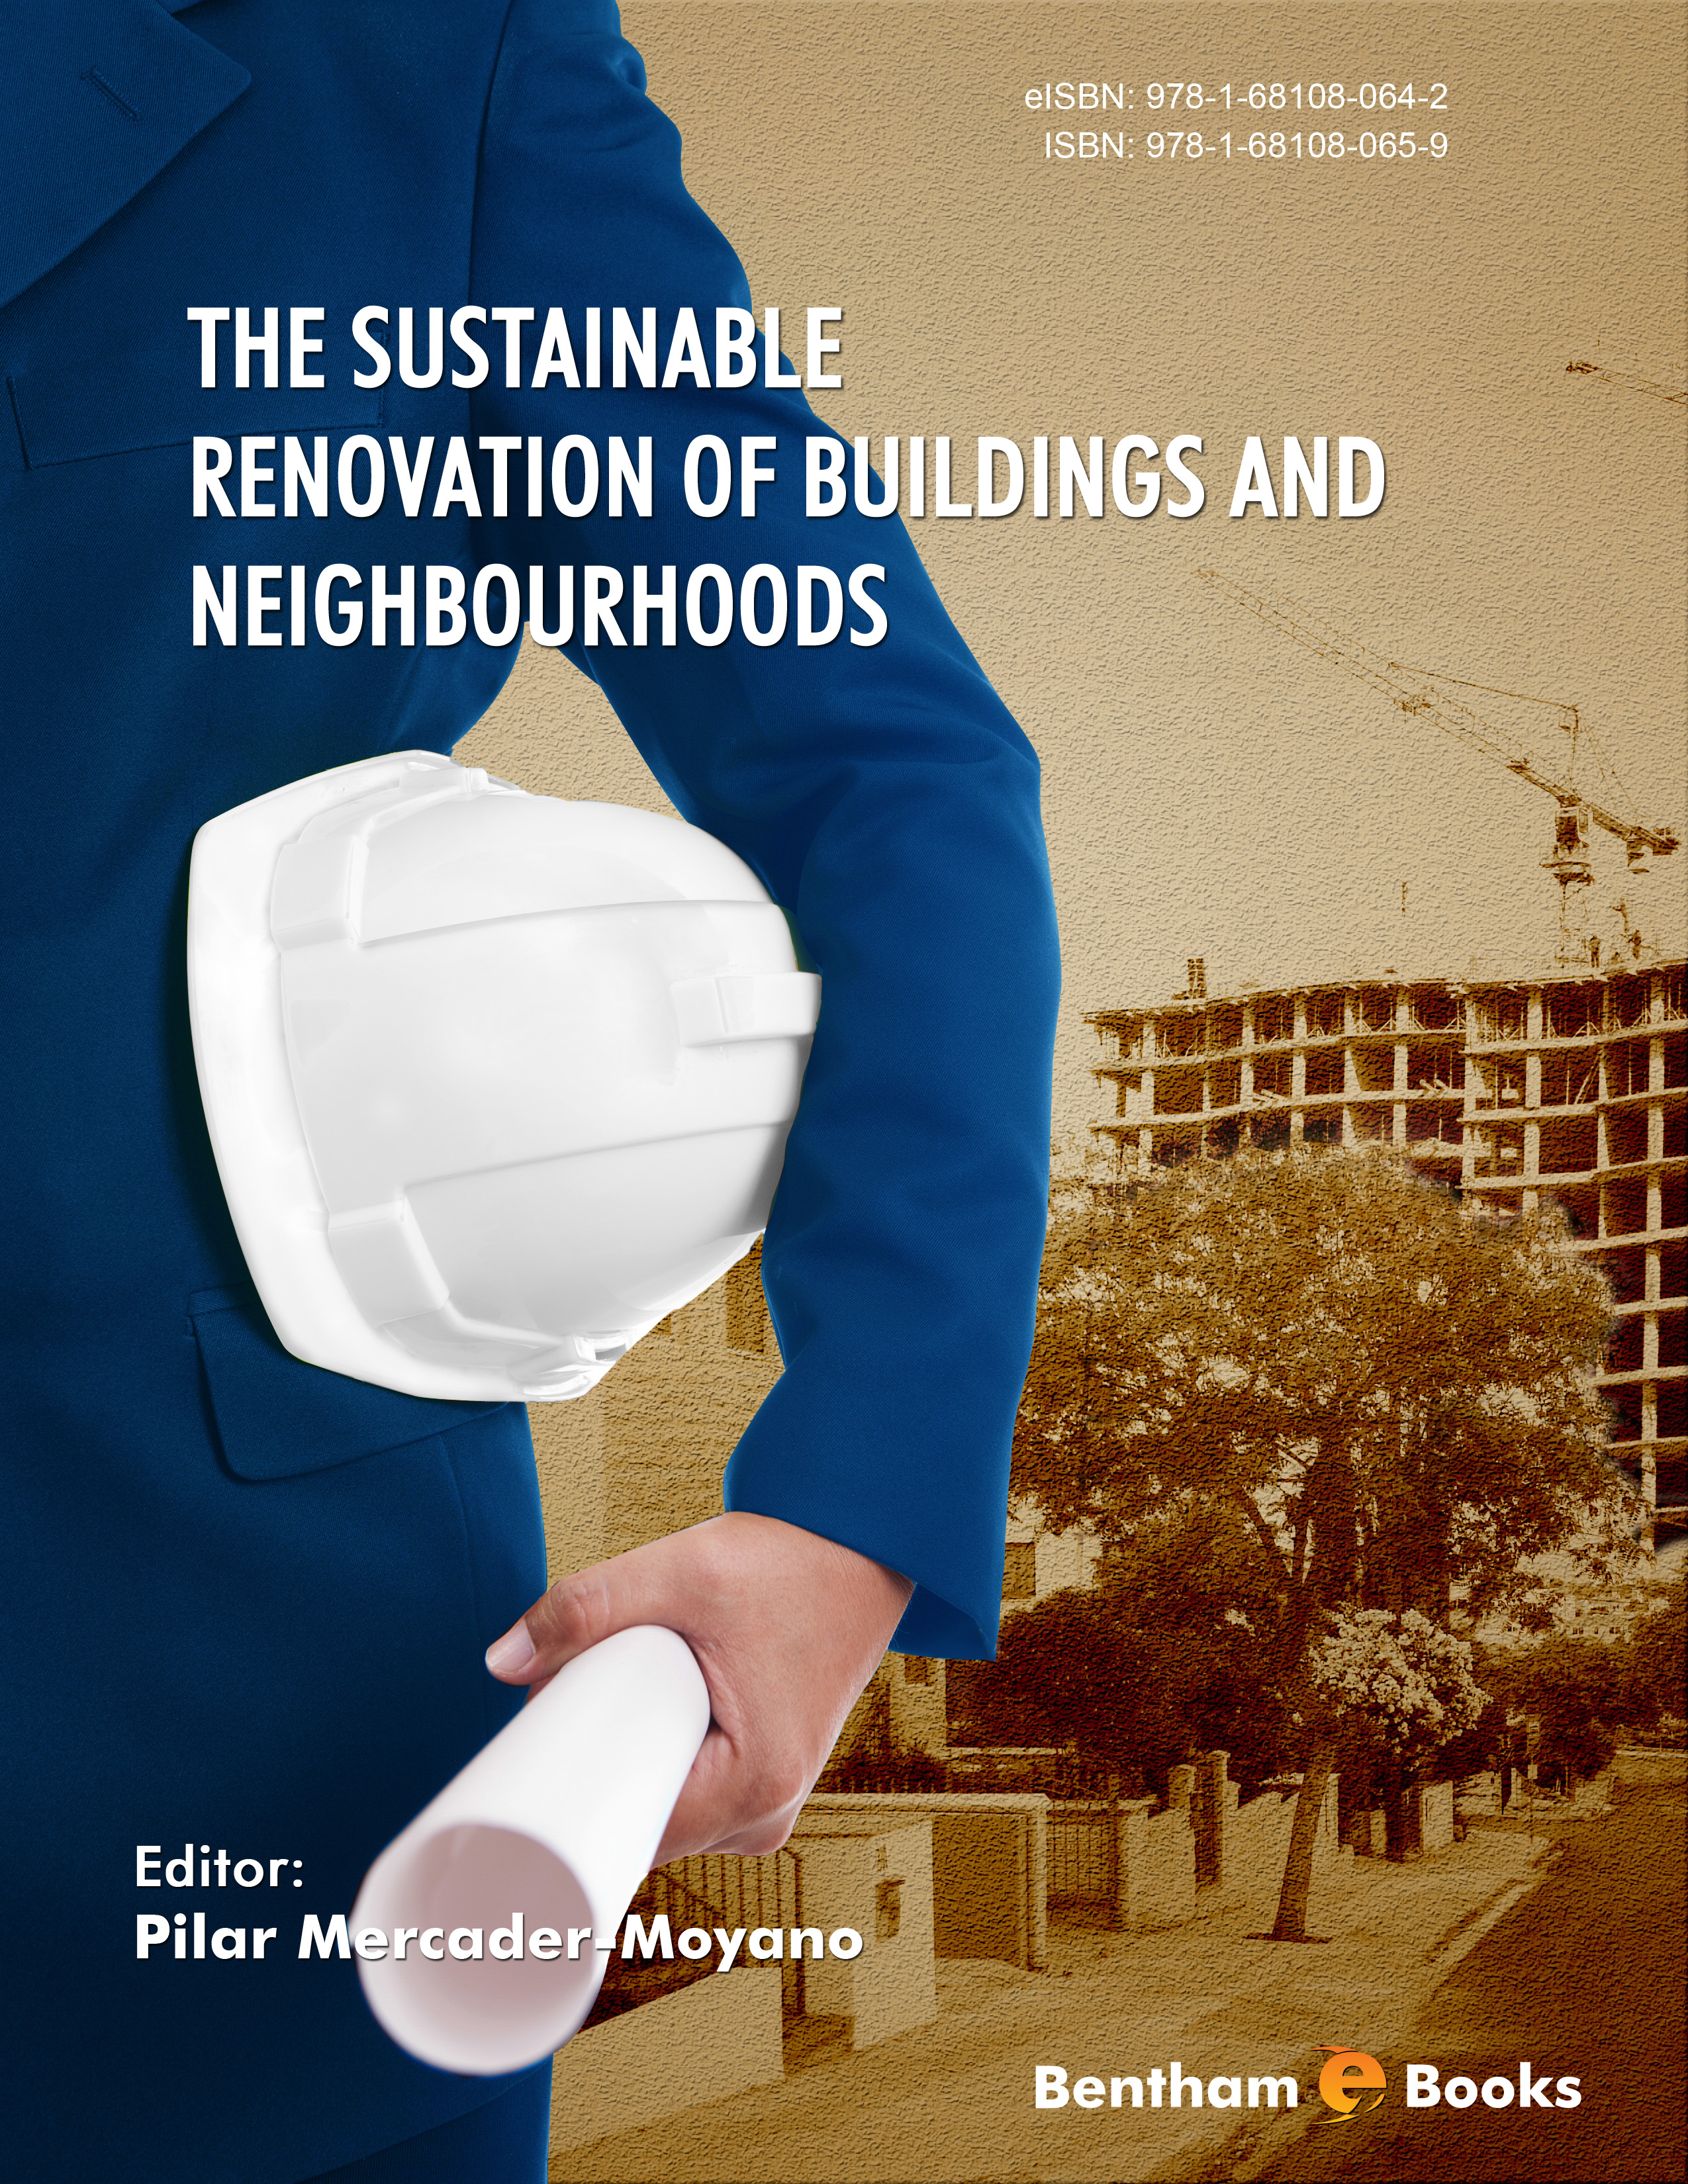 The Sustainable Renovation of Buildings and Neighbourhoods